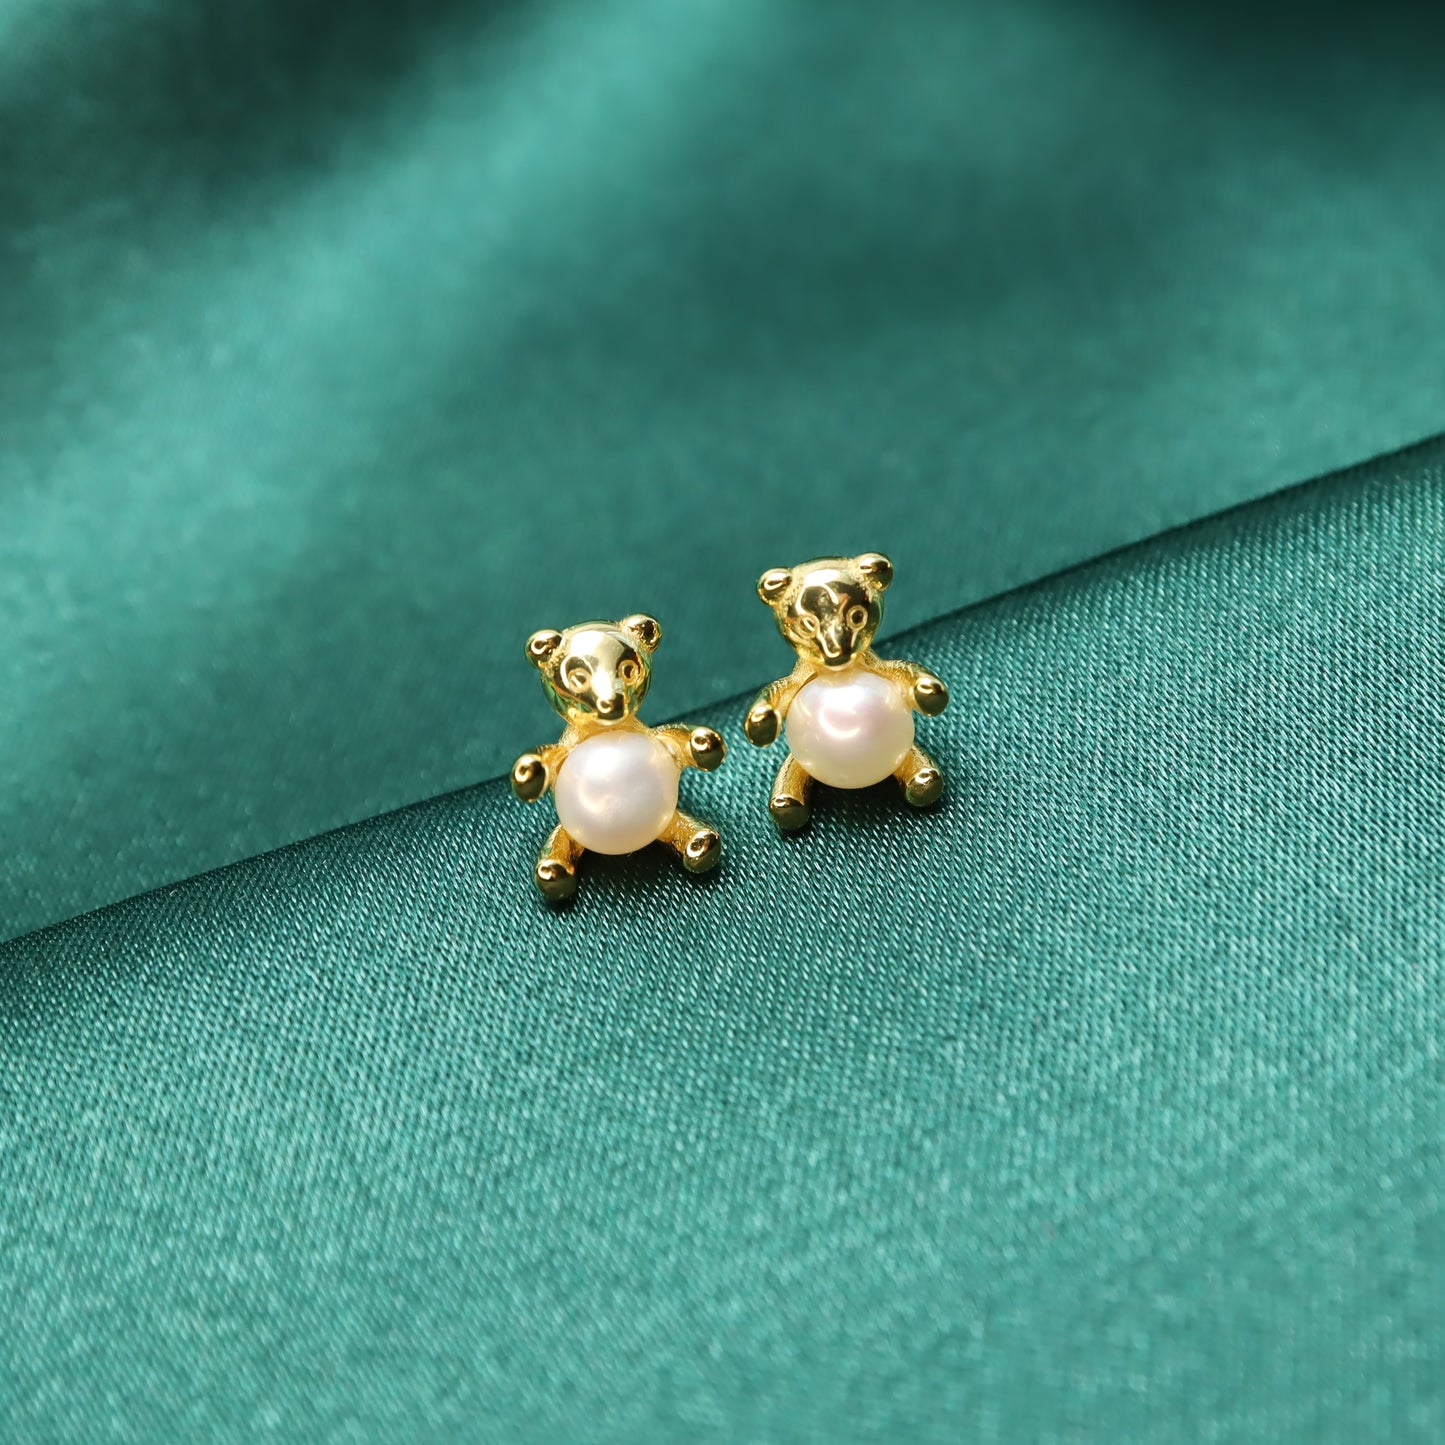 Teddy Bear S925 Sterling Silver Gold Plated with Faux Pearl Stud Earrings (Color: Gold)